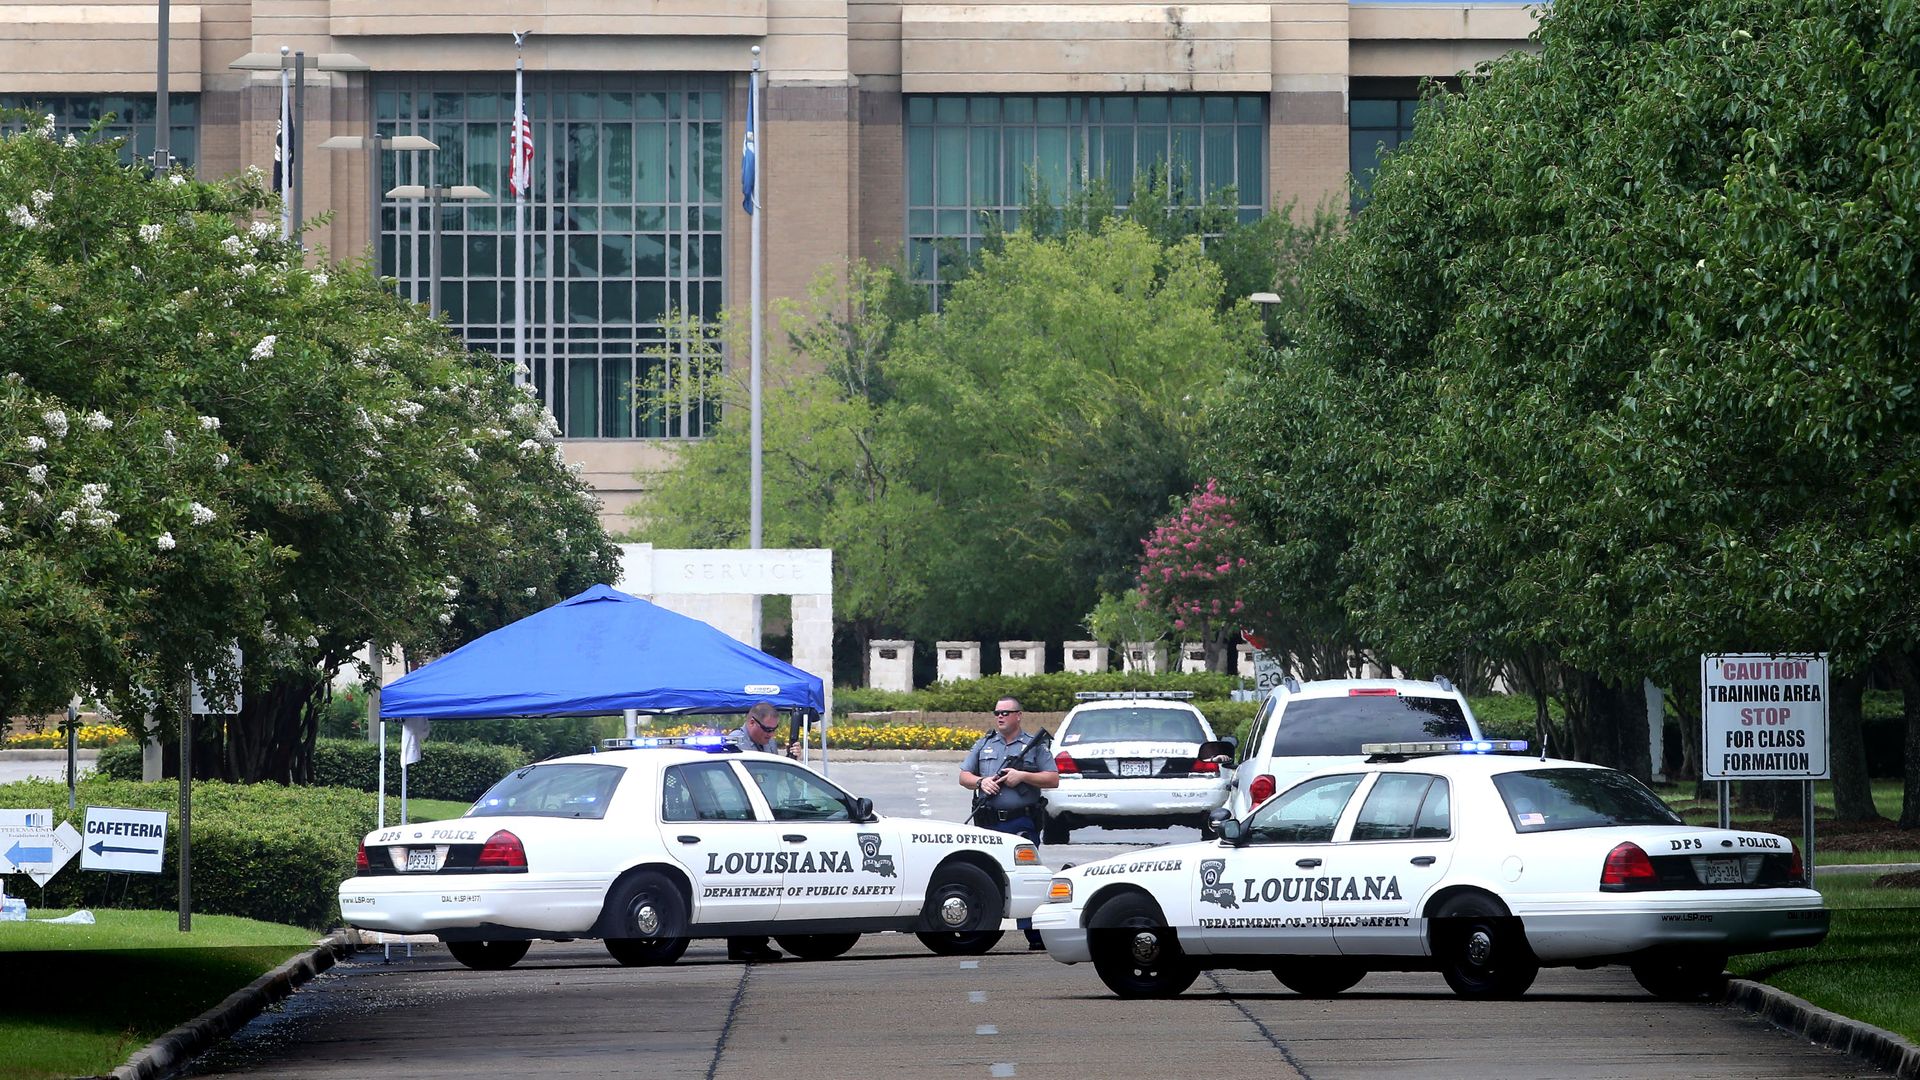 Photo of police cars parked in front of the Louisiana State Police building